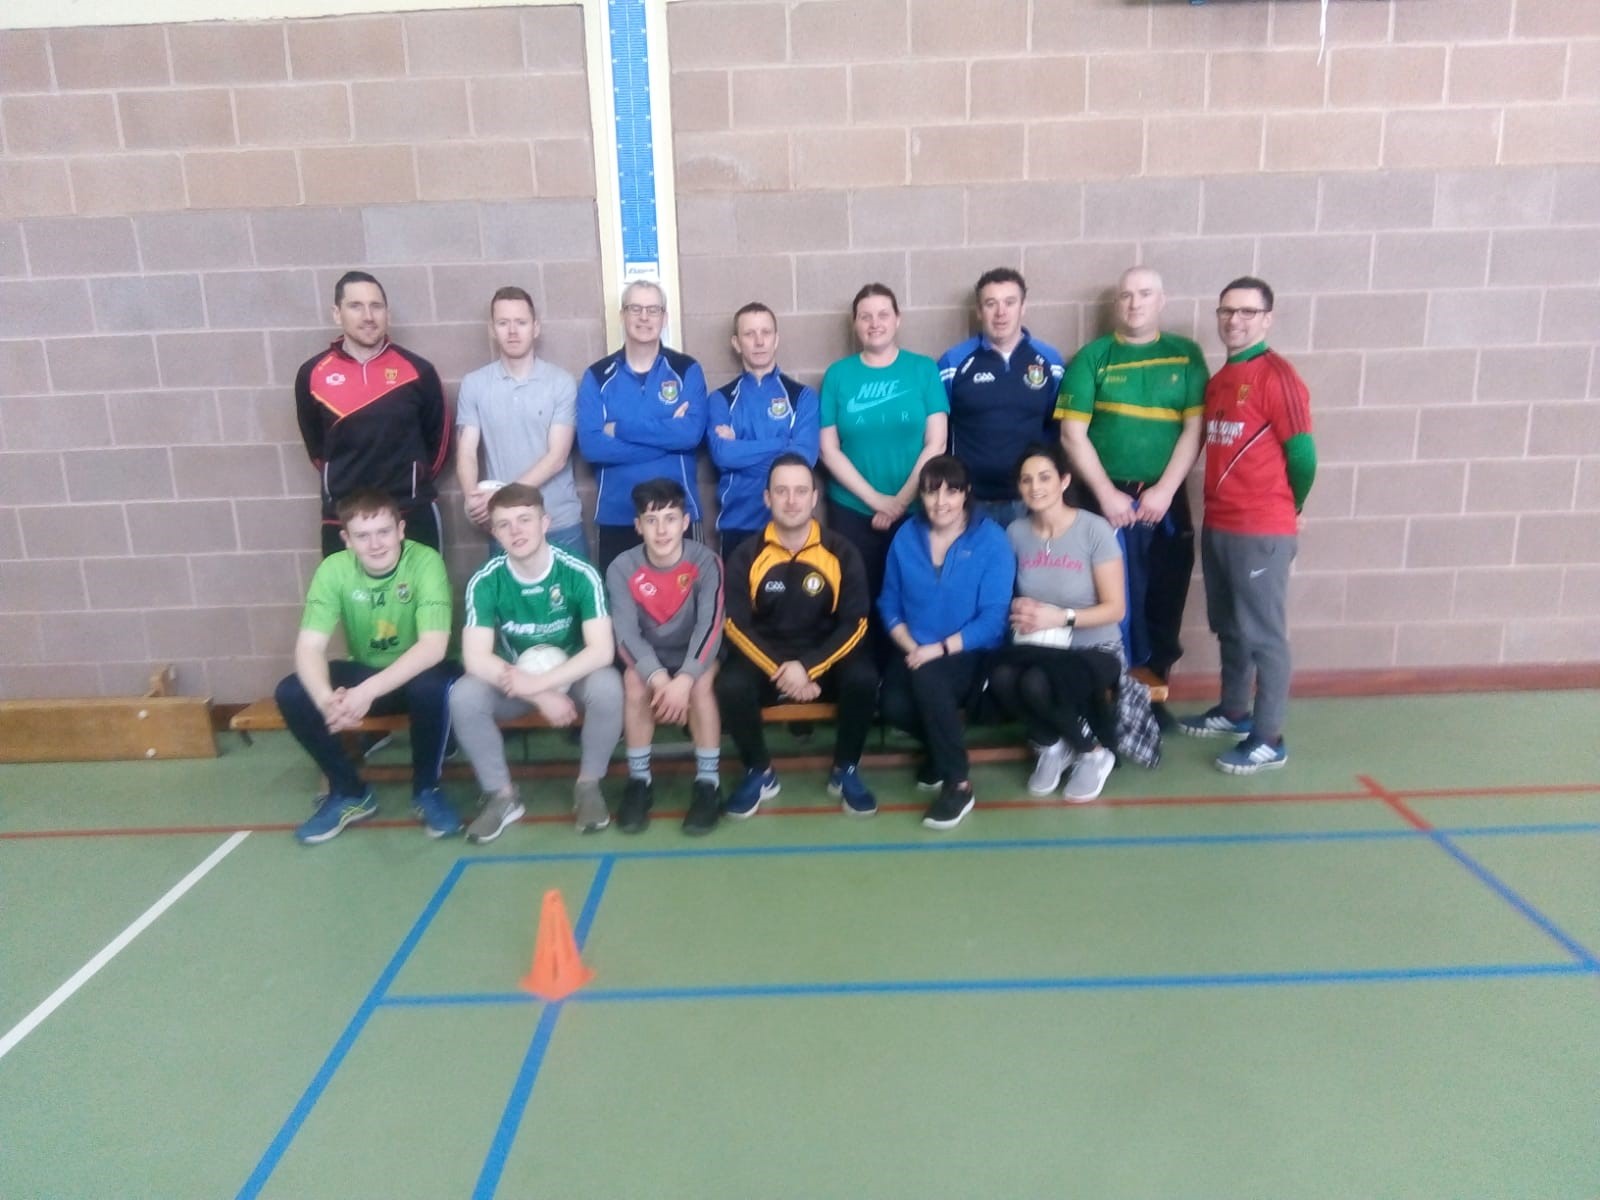 Foundation Coaching Programme a Great Success